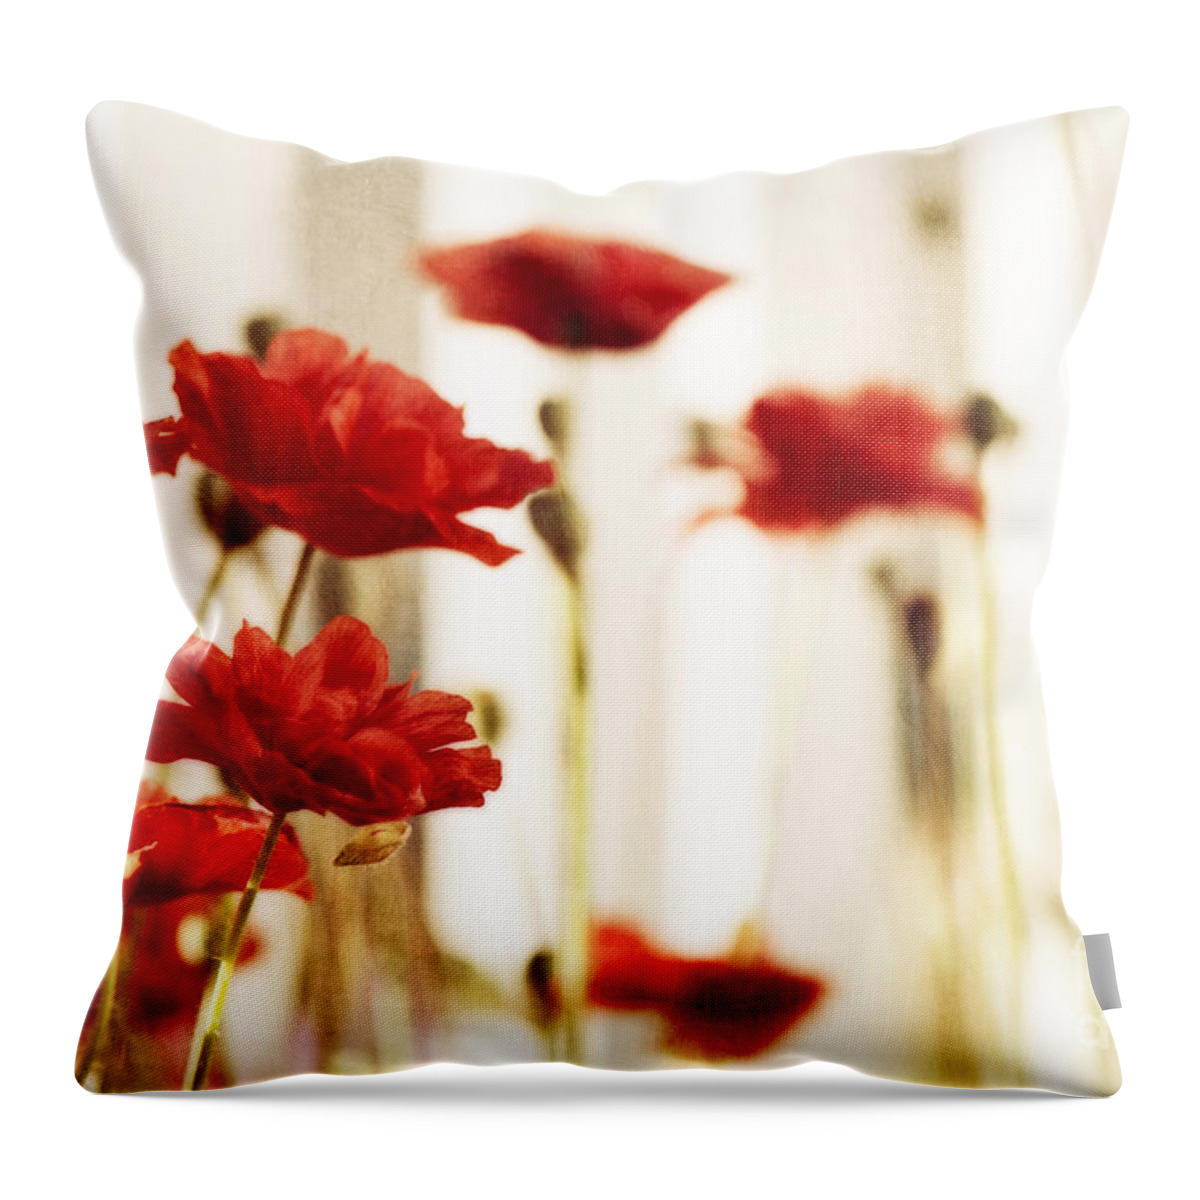 Poppy Throw Pillow featuring the photograph Ruby reds by Priska Wettstein